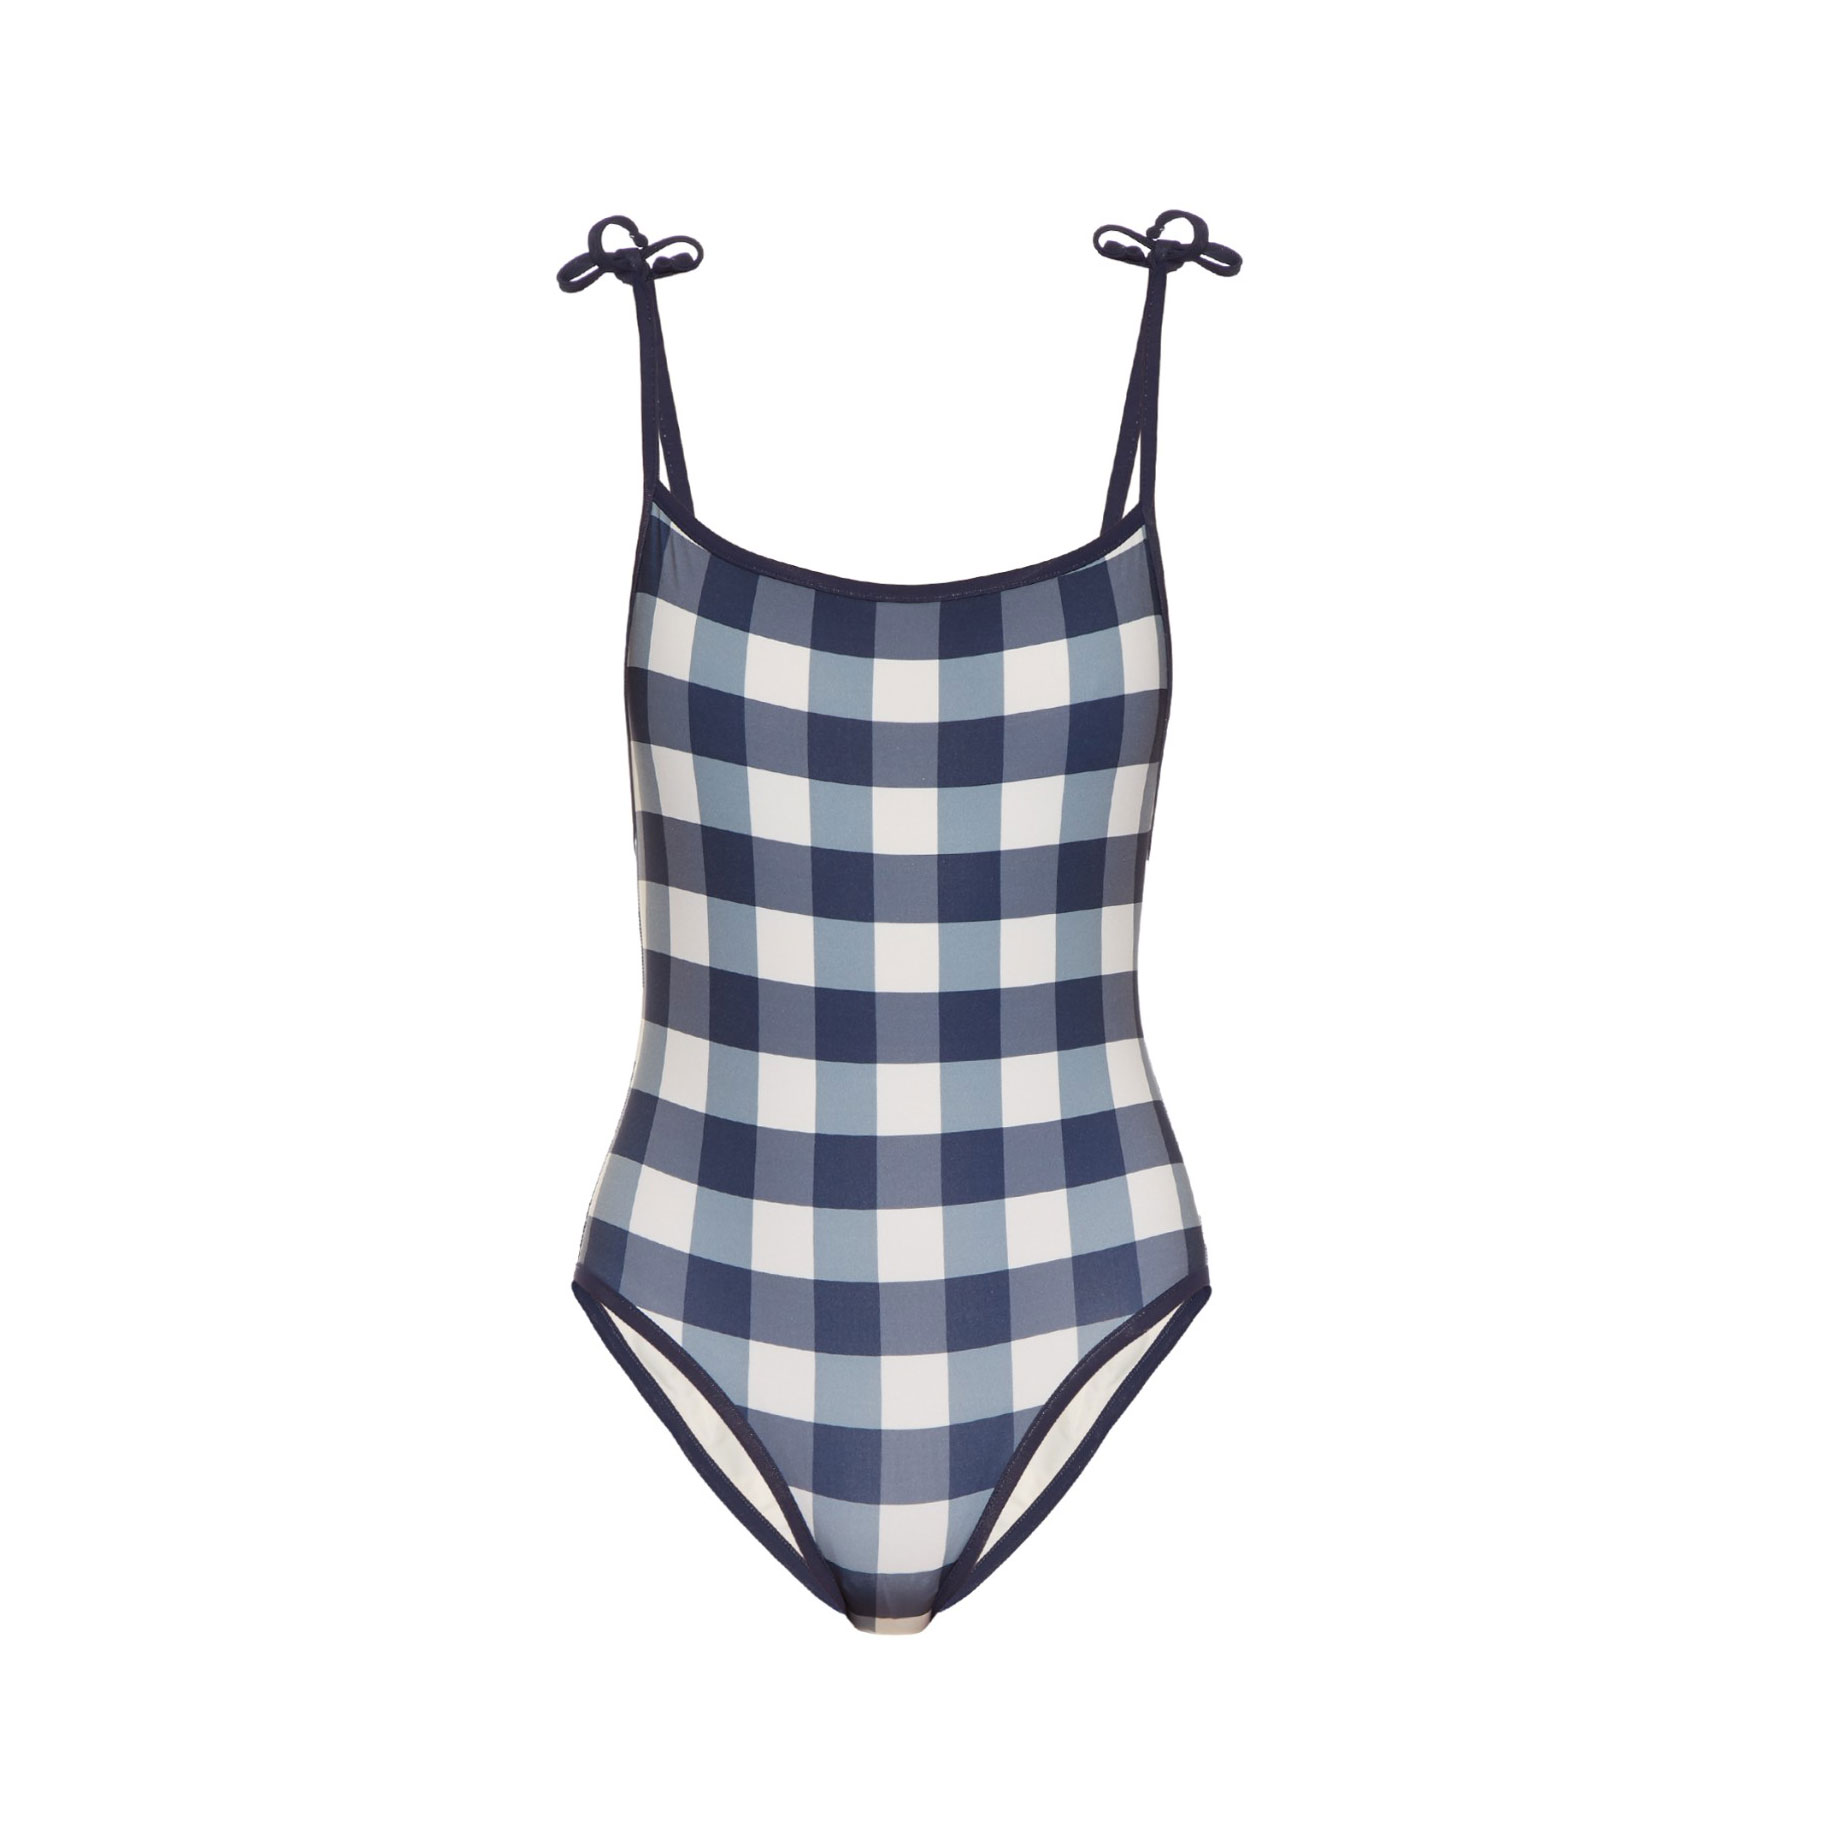 Swimsuits for Summer: Crochet, Gingham, Sporty, One Piece, Ballet ...